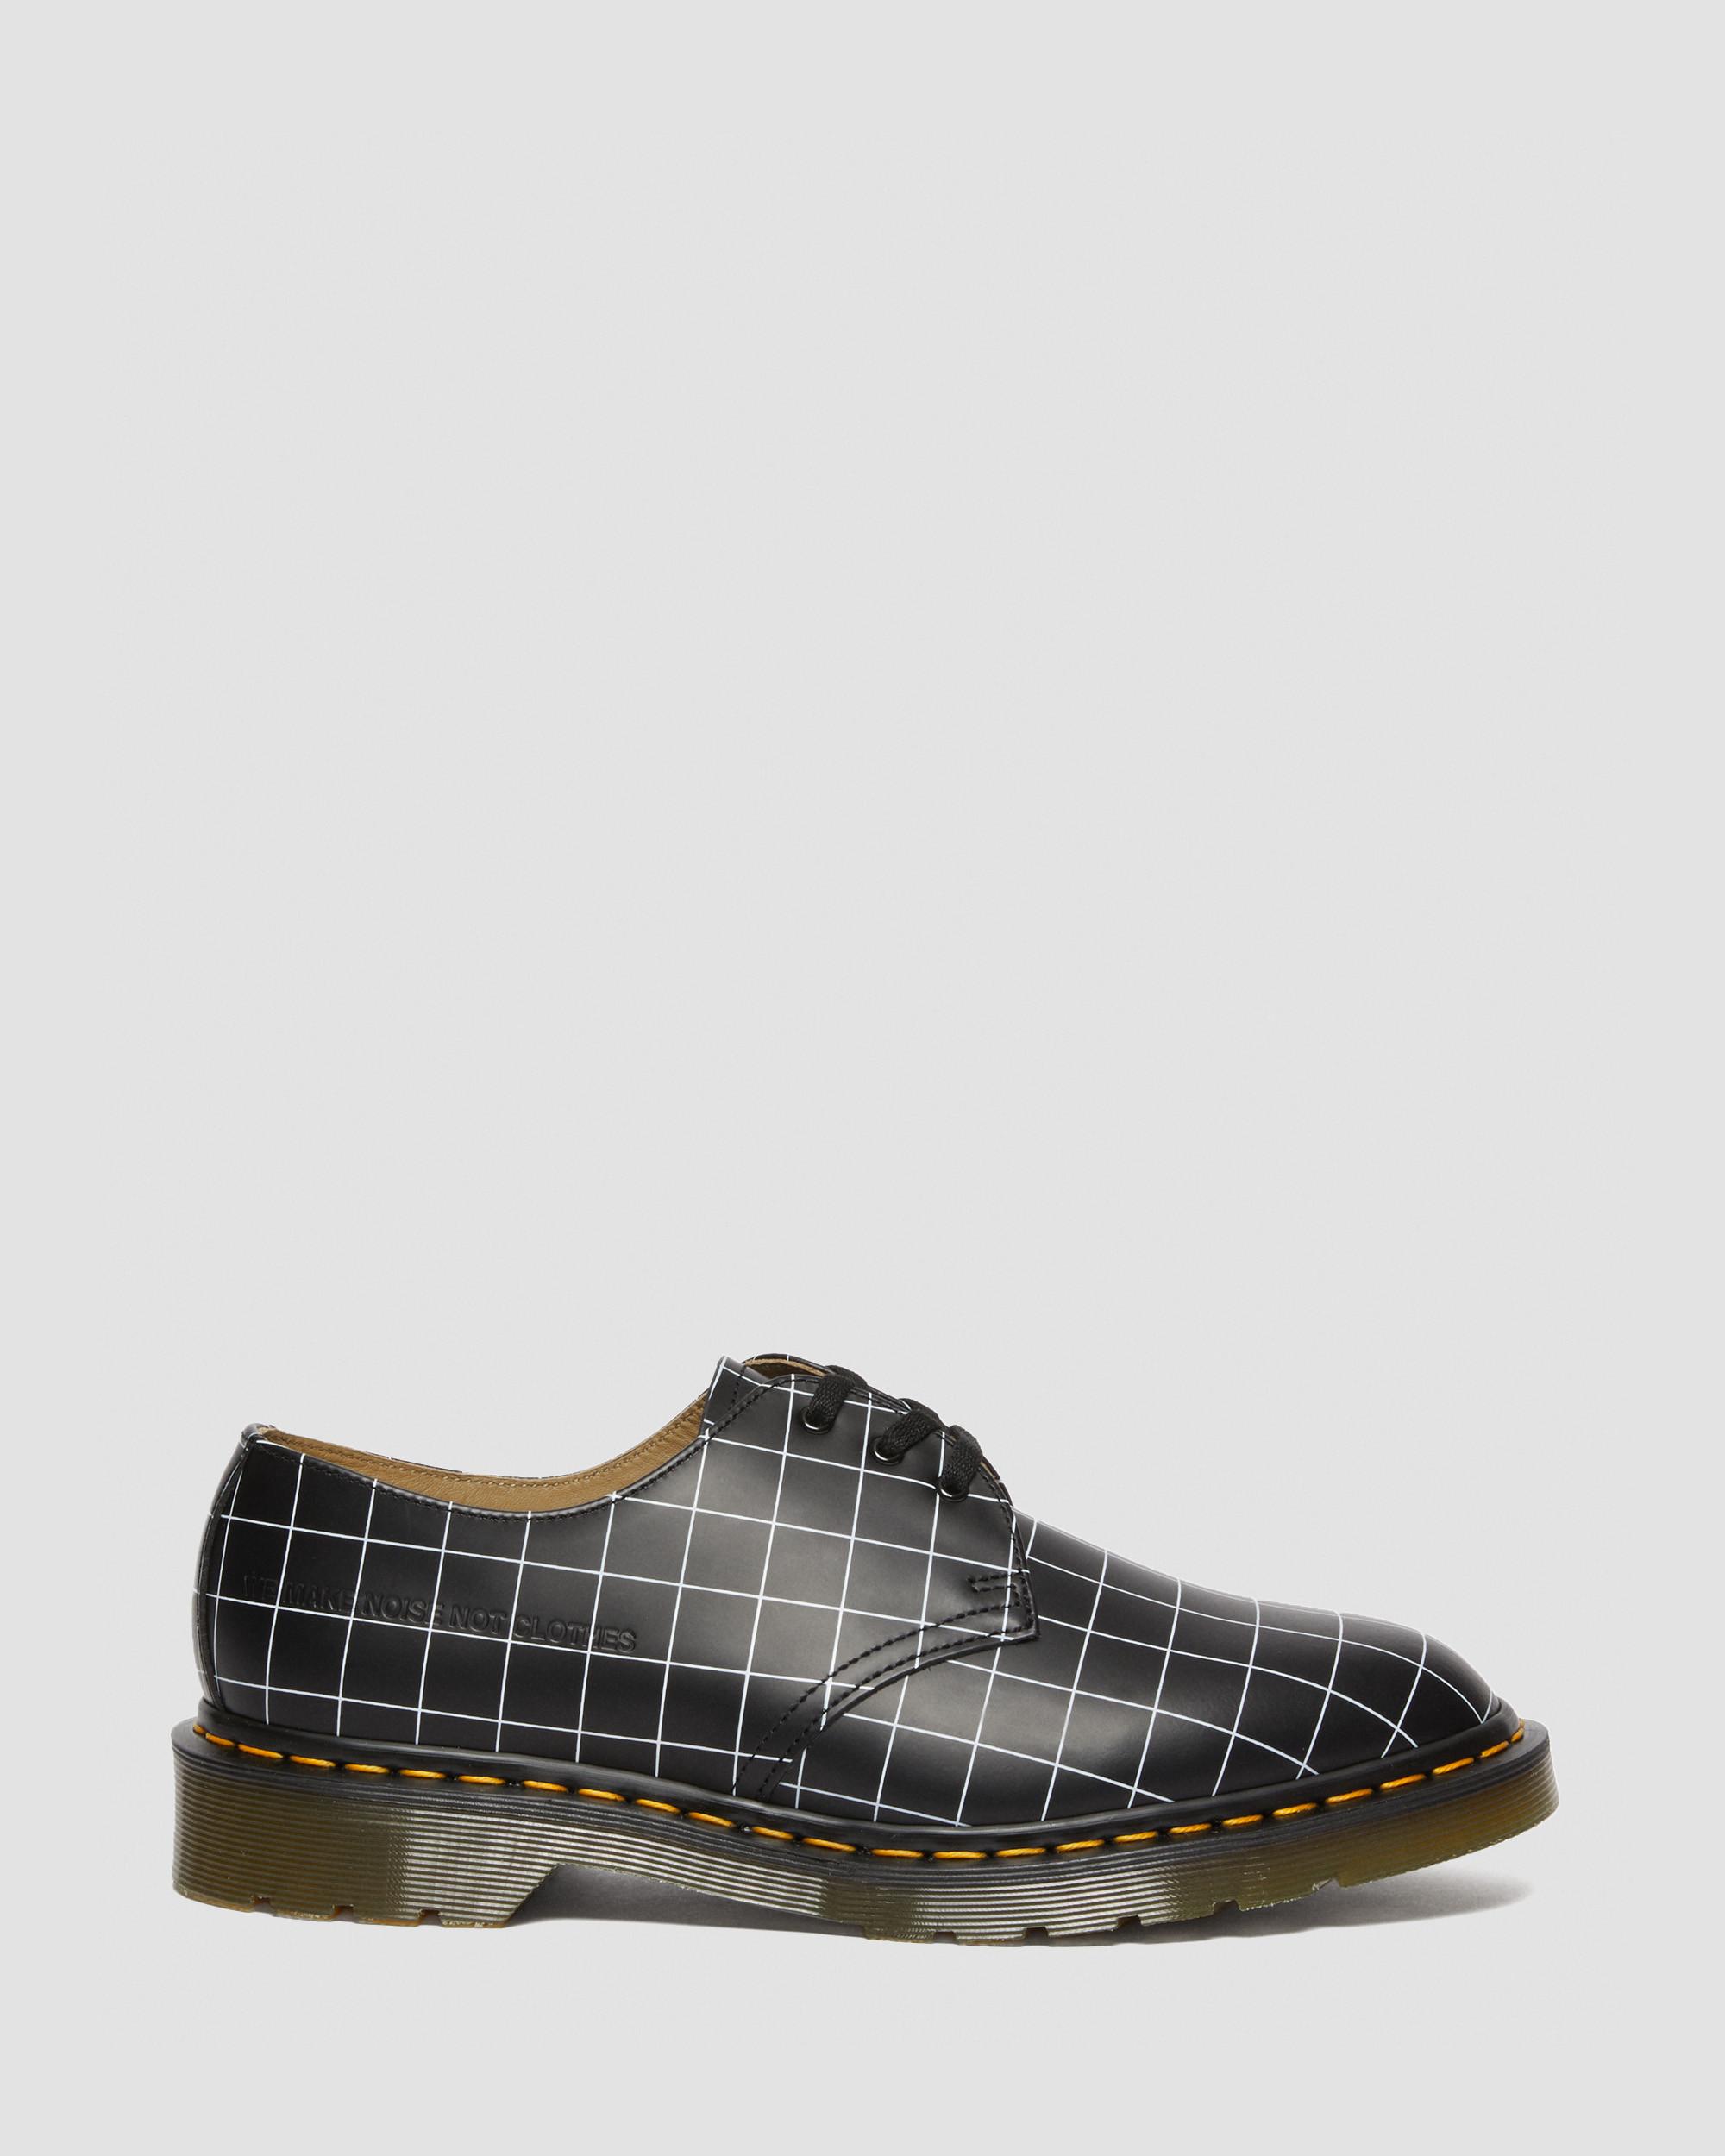 1461 Undercover Made in England Leather Oxford Shoes in Black